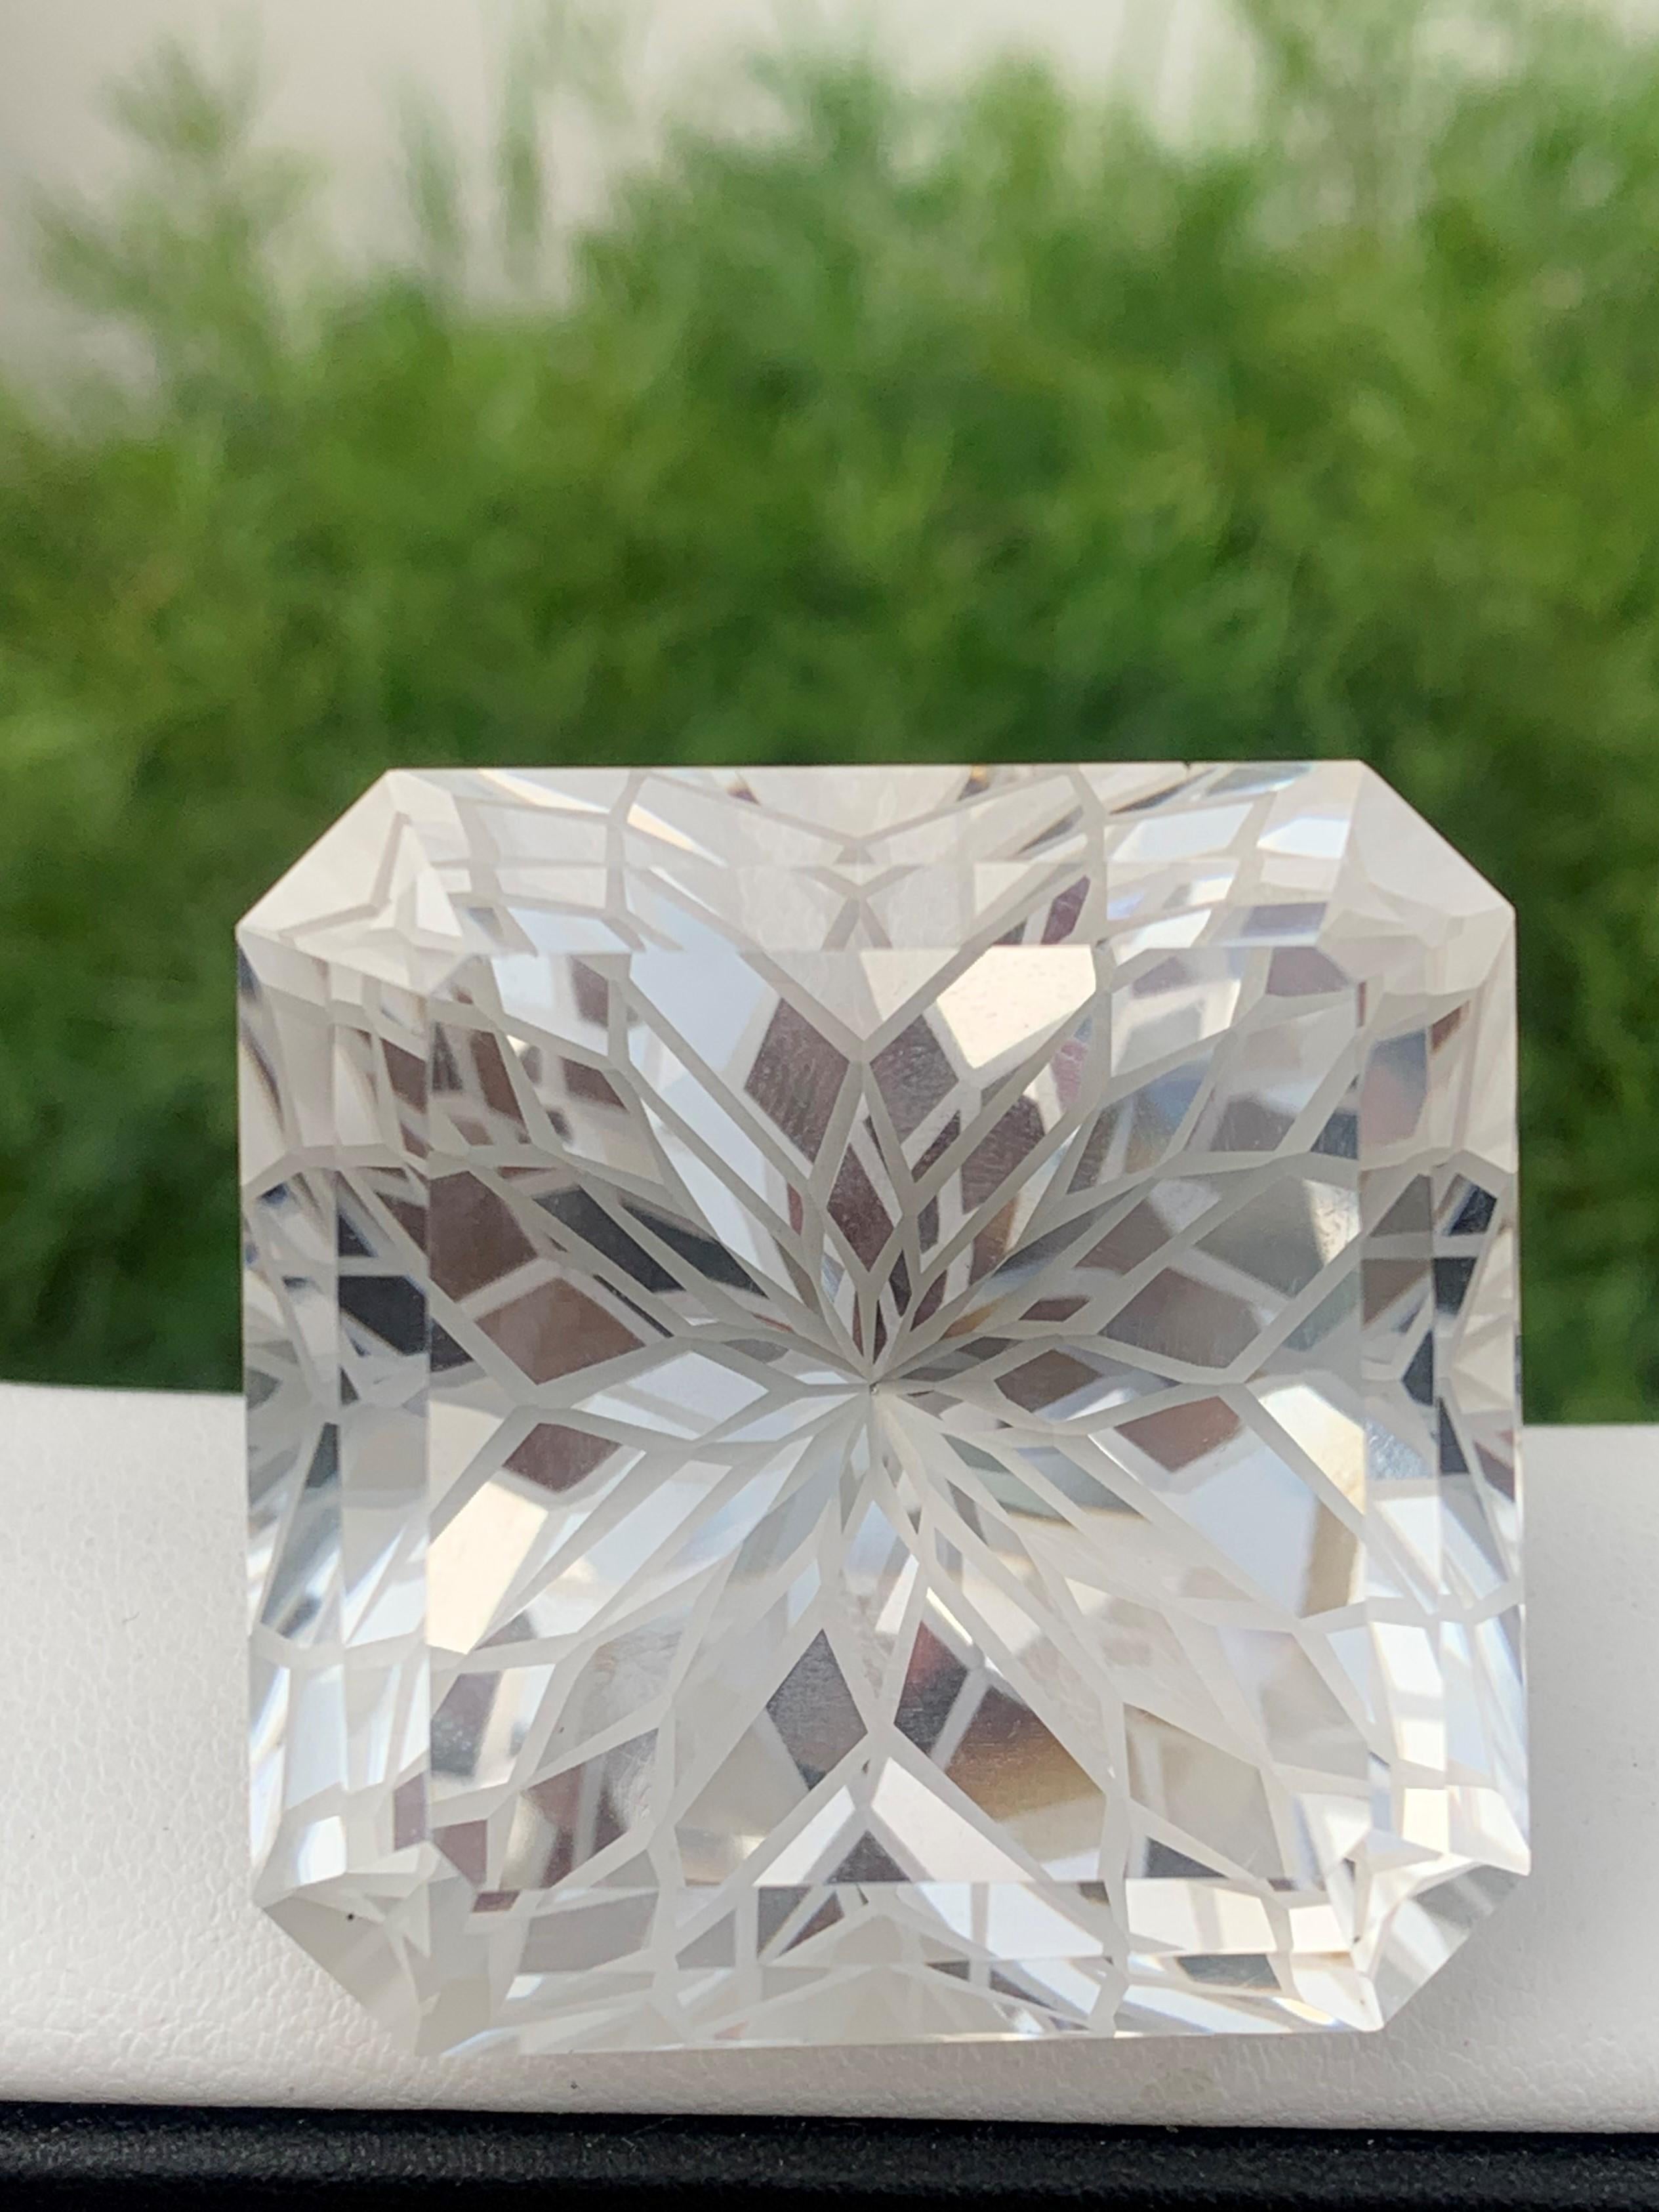 Loose Crystal Quartz 
Weight : 278.95 Carats 
Dimensions : 38x38x27 Mm
Origin : Brazil 
Clarity : AAA Eye Clean 
Shape: Square
Facet: Flower Cut 
 Certificate: On Demand 
Treatment: Non 
Color: Colorless 
Quartz crystal is a power stone that's